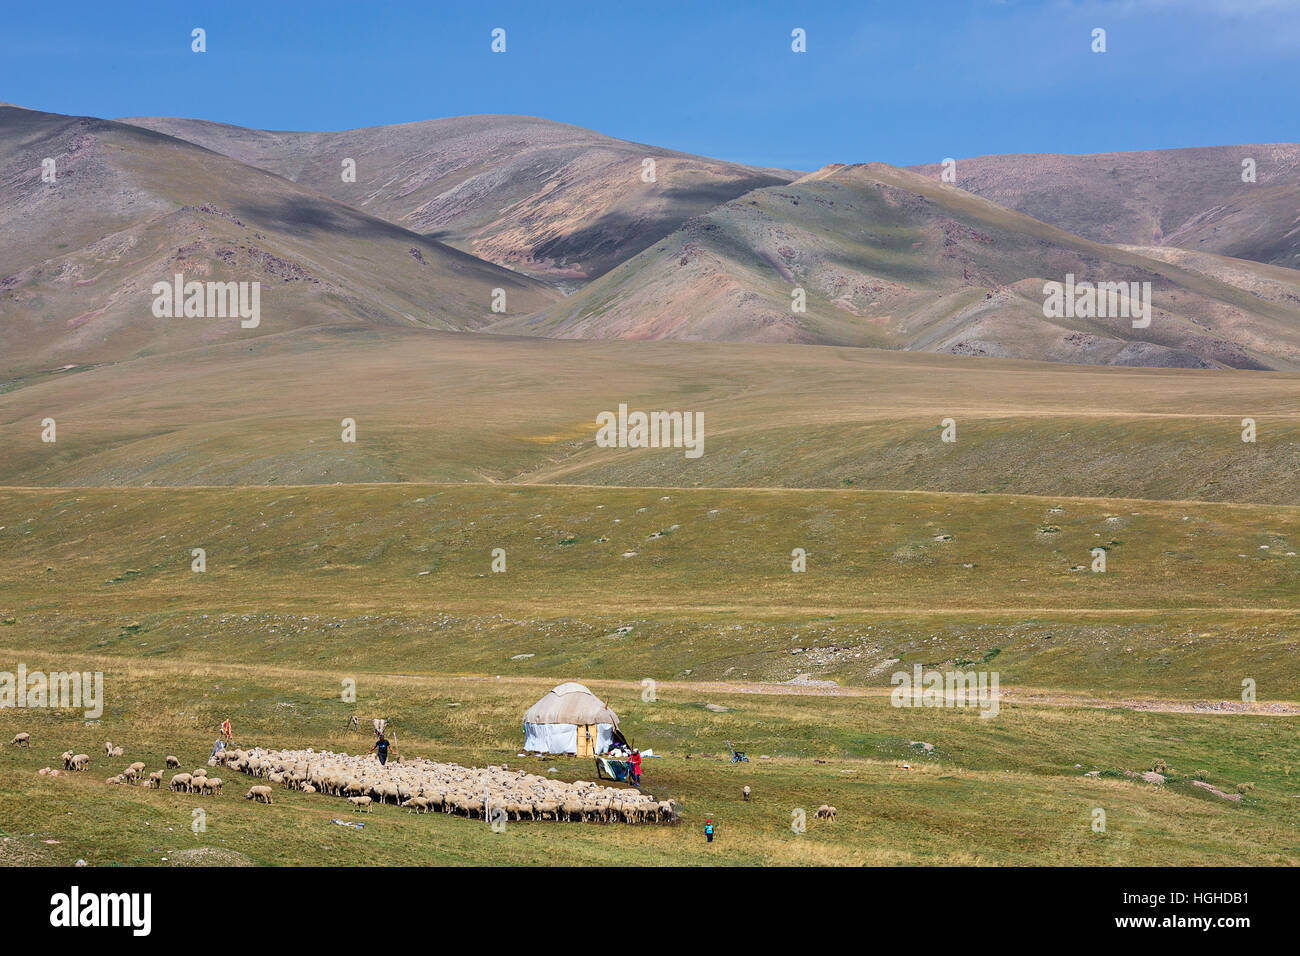 Kazakh nomadic people with their yurt and herd of sheep. Stock Photo